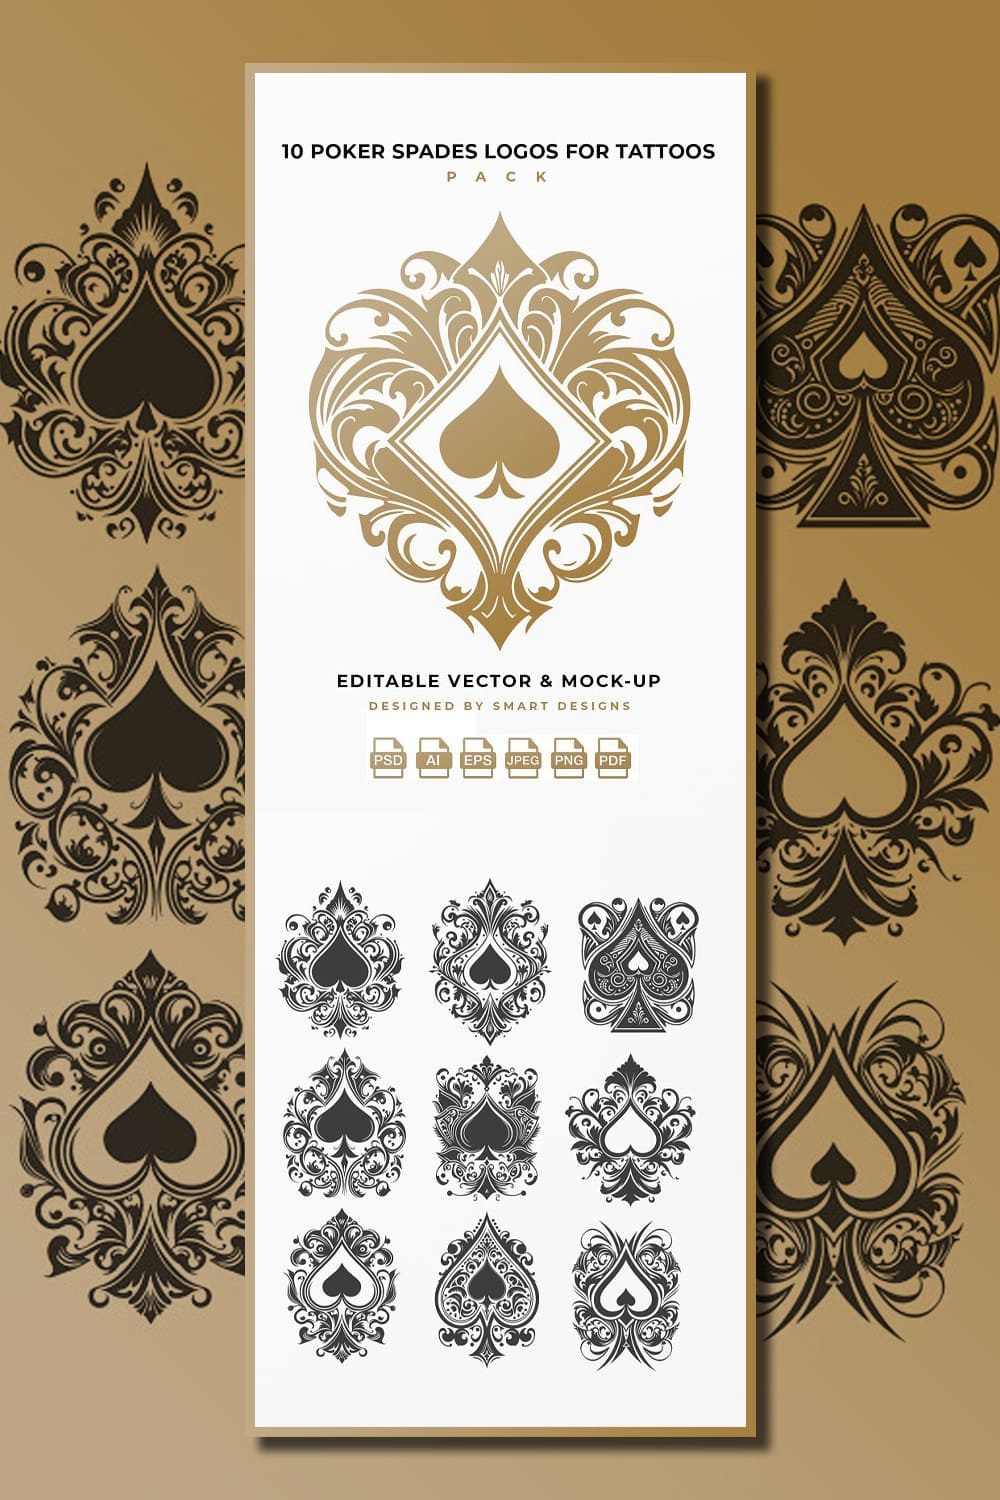 Poker Spades Logos for Tattoos Pack pinterest image preview.